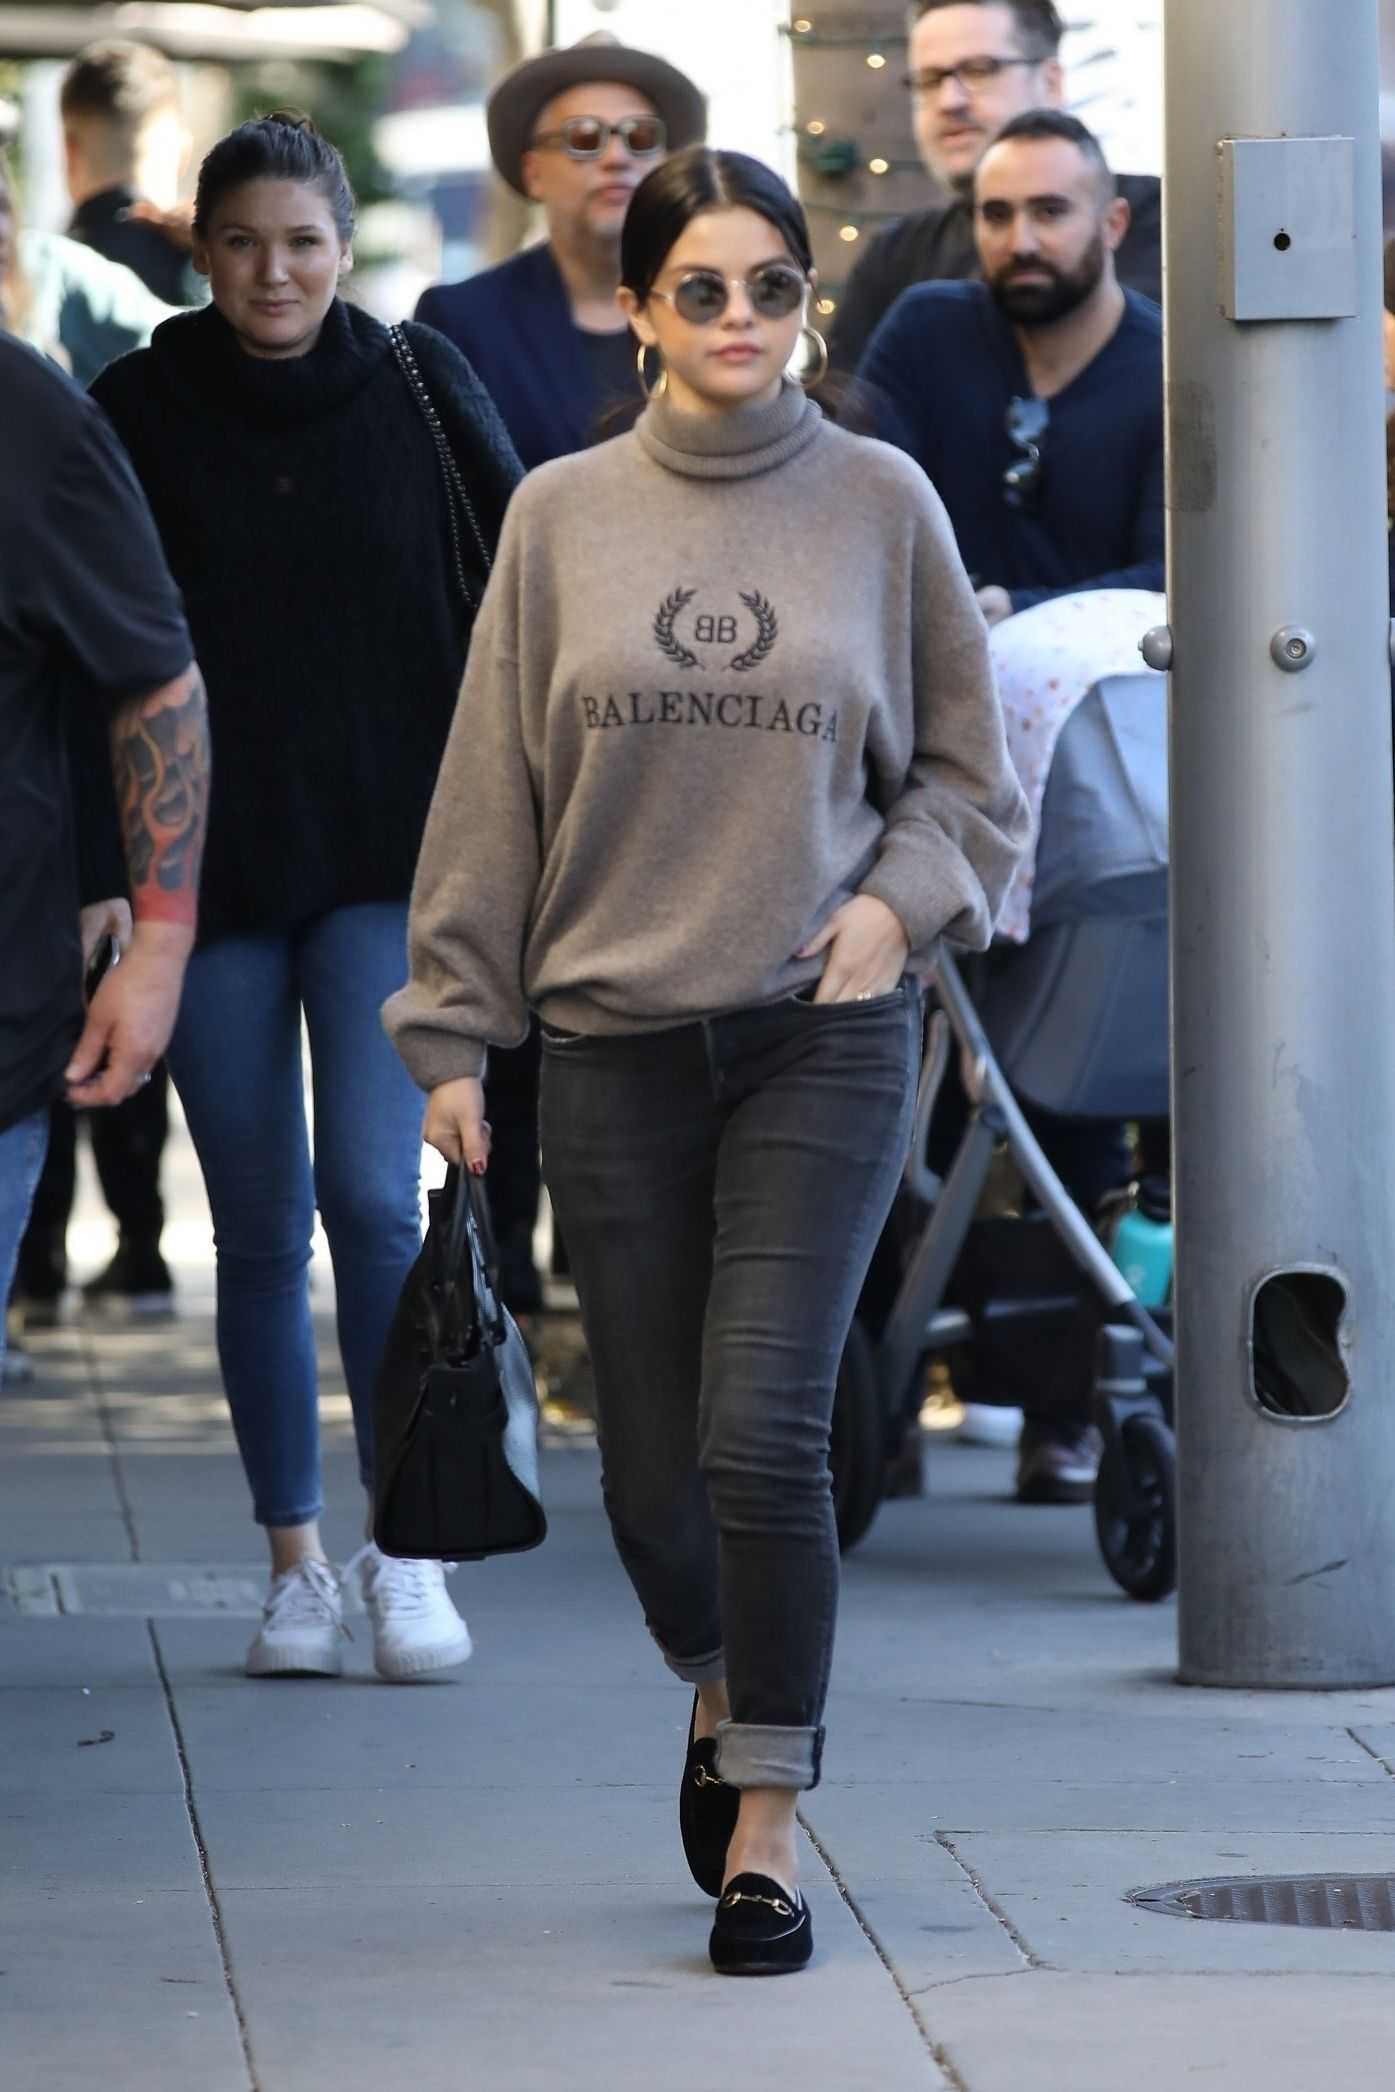 Selena_Gomez_-_Looks_stylish_as_she_steps_out_for_lunch_in_Beverly_Hills2C_CA_December_292C_2018-01.jpg